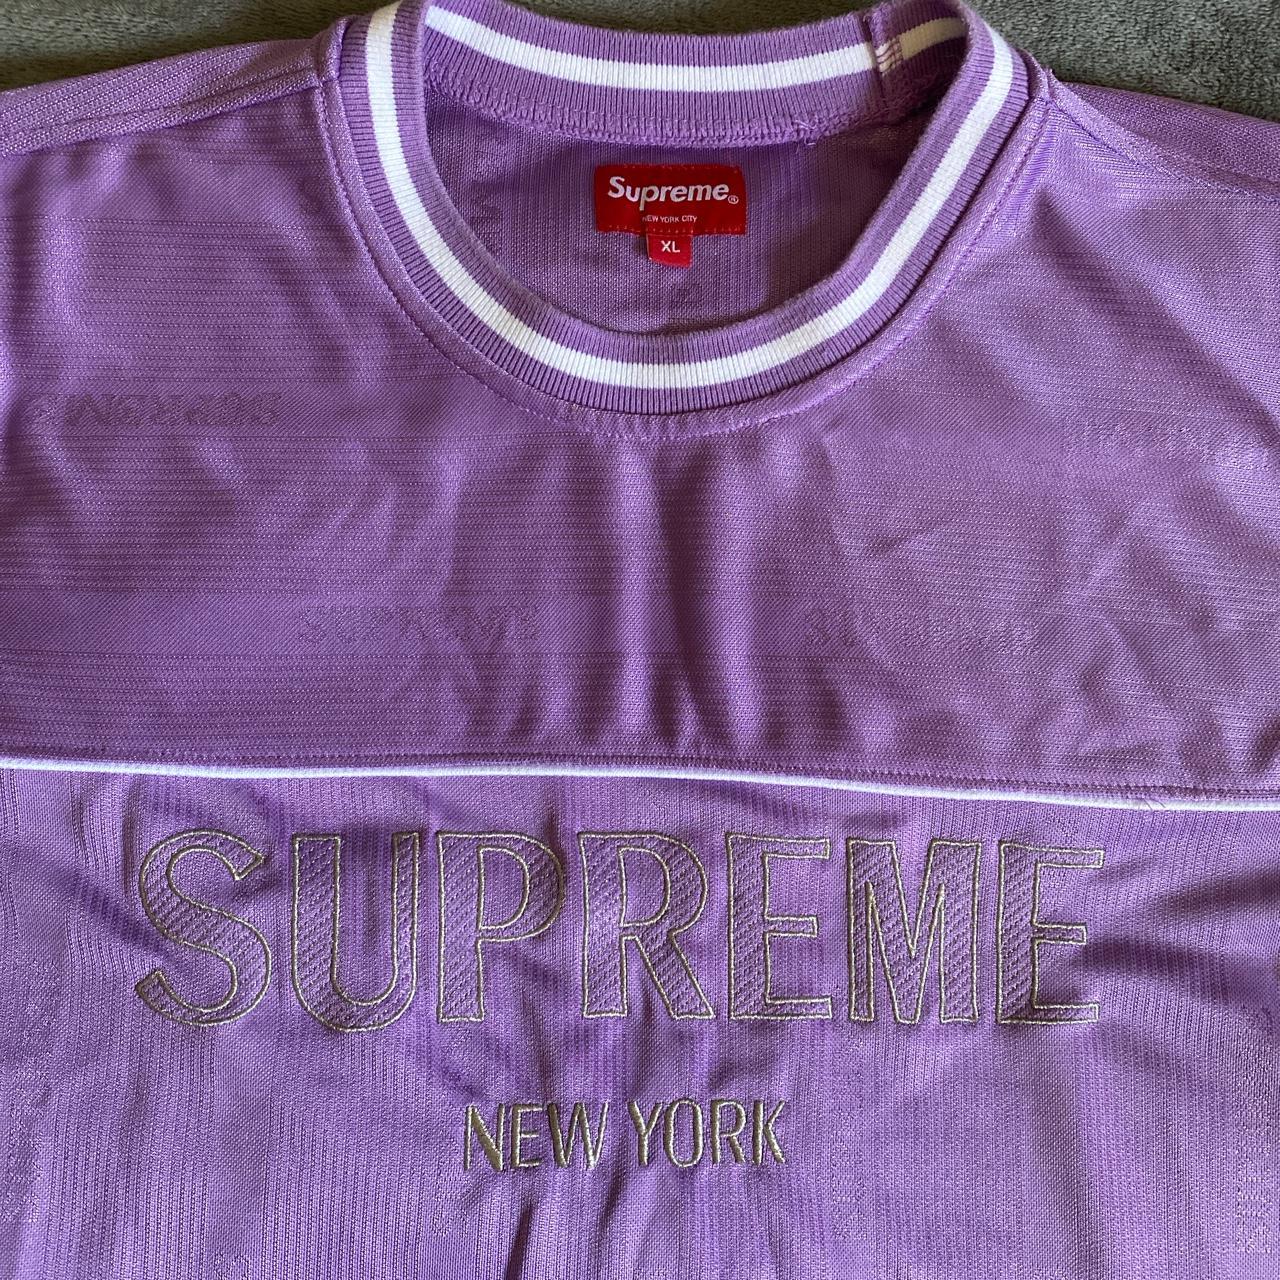 supreme mitchel and ness jersey worn once no flaws - Depop